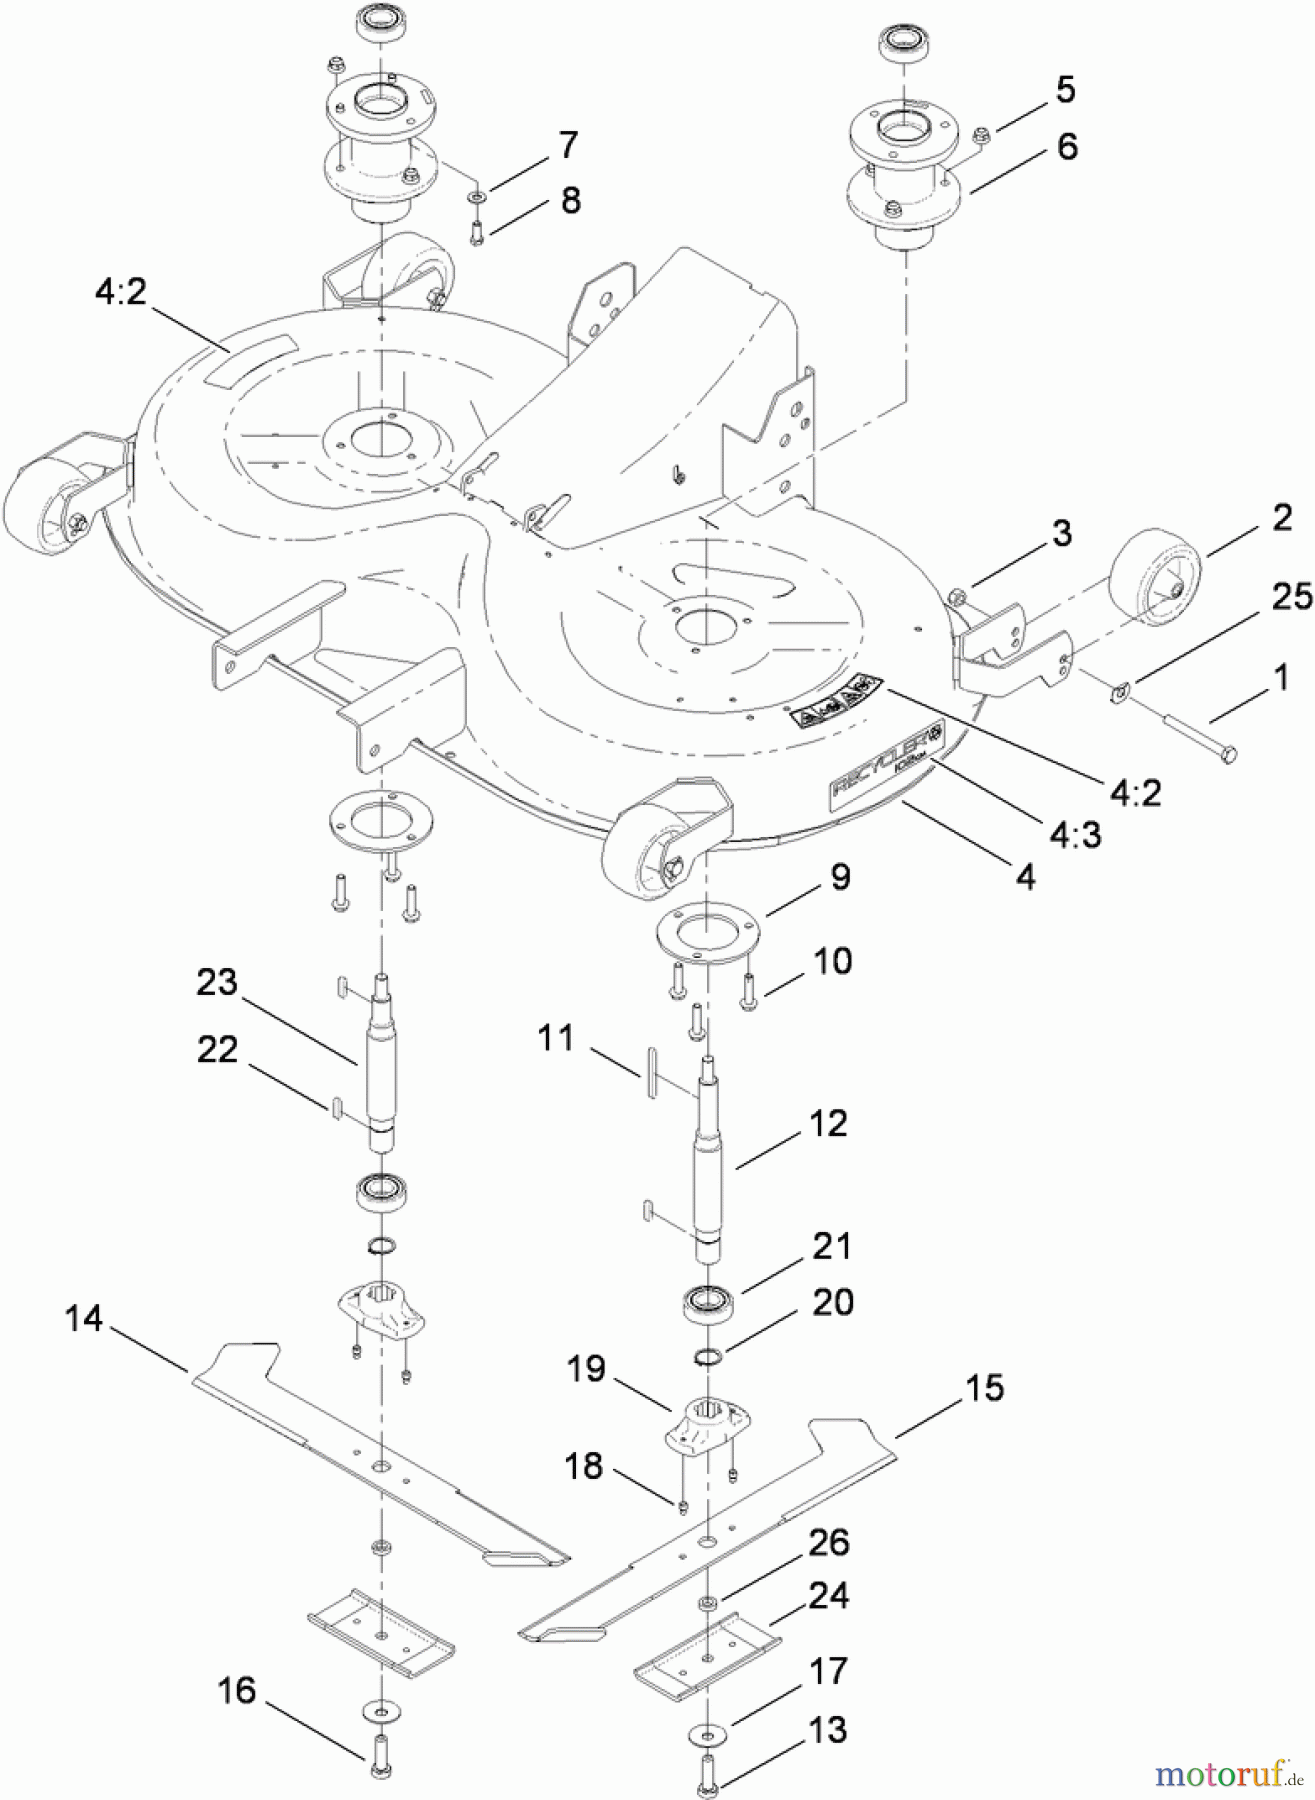  Toro Neu Mowers, Lawn & Garden Tractor Seite 1 74573 (DH 200) - Toro DH 200 Lawn Tractor, 2010 (310000001-310999999) CUTTING PAN AND MOWER HOUSING ASSEMBLY